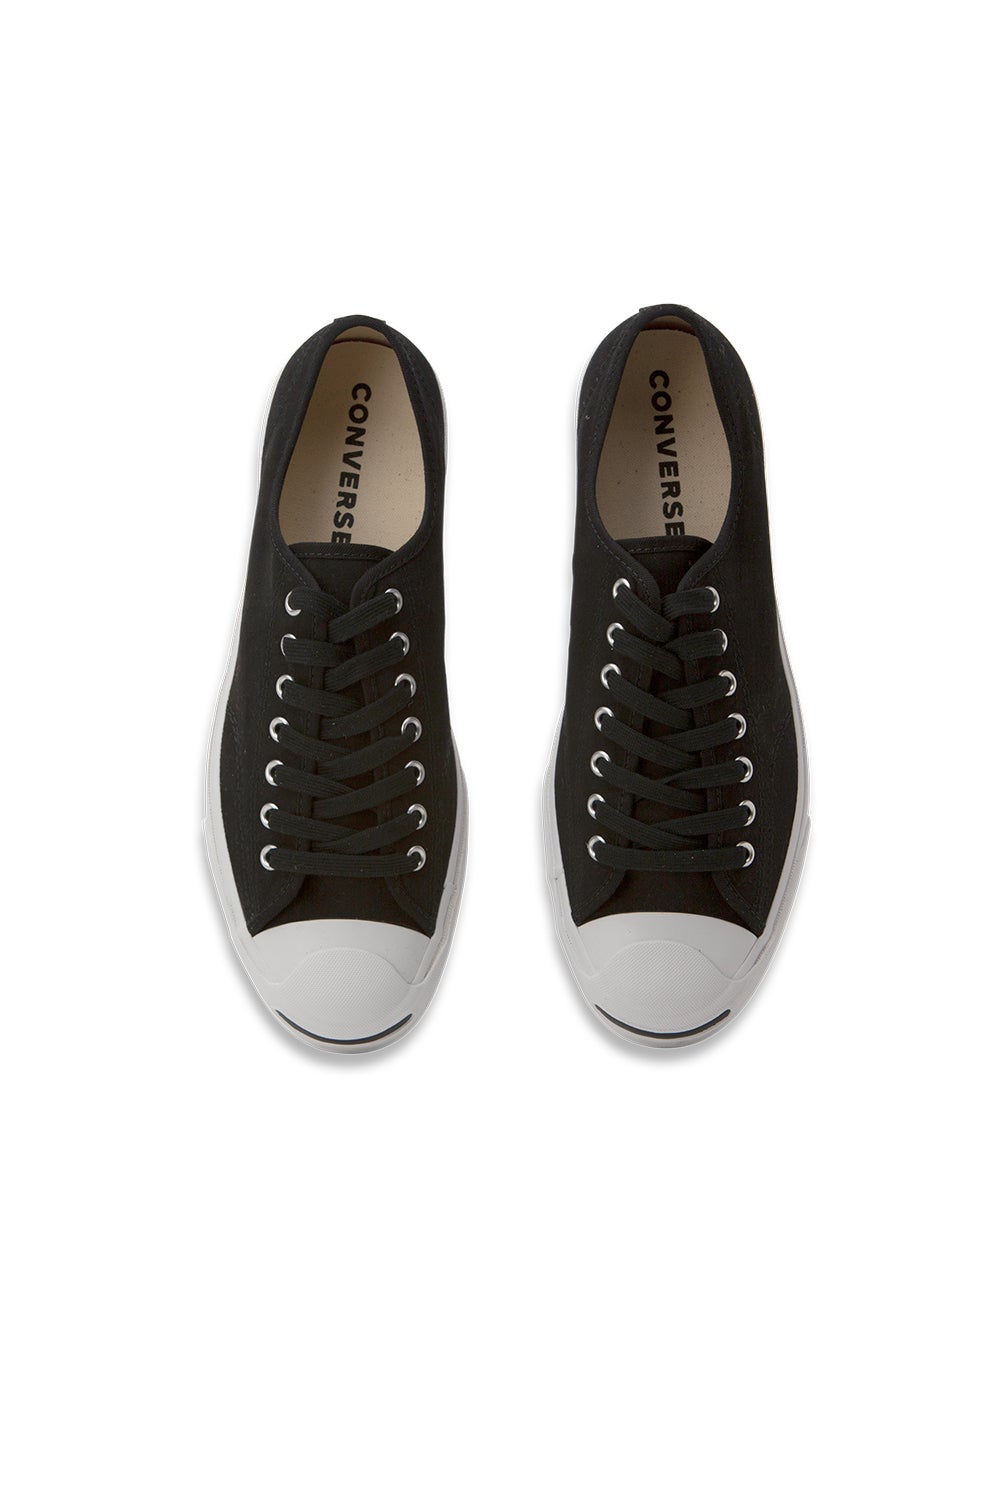 Converse Jack Purcell First In Class 